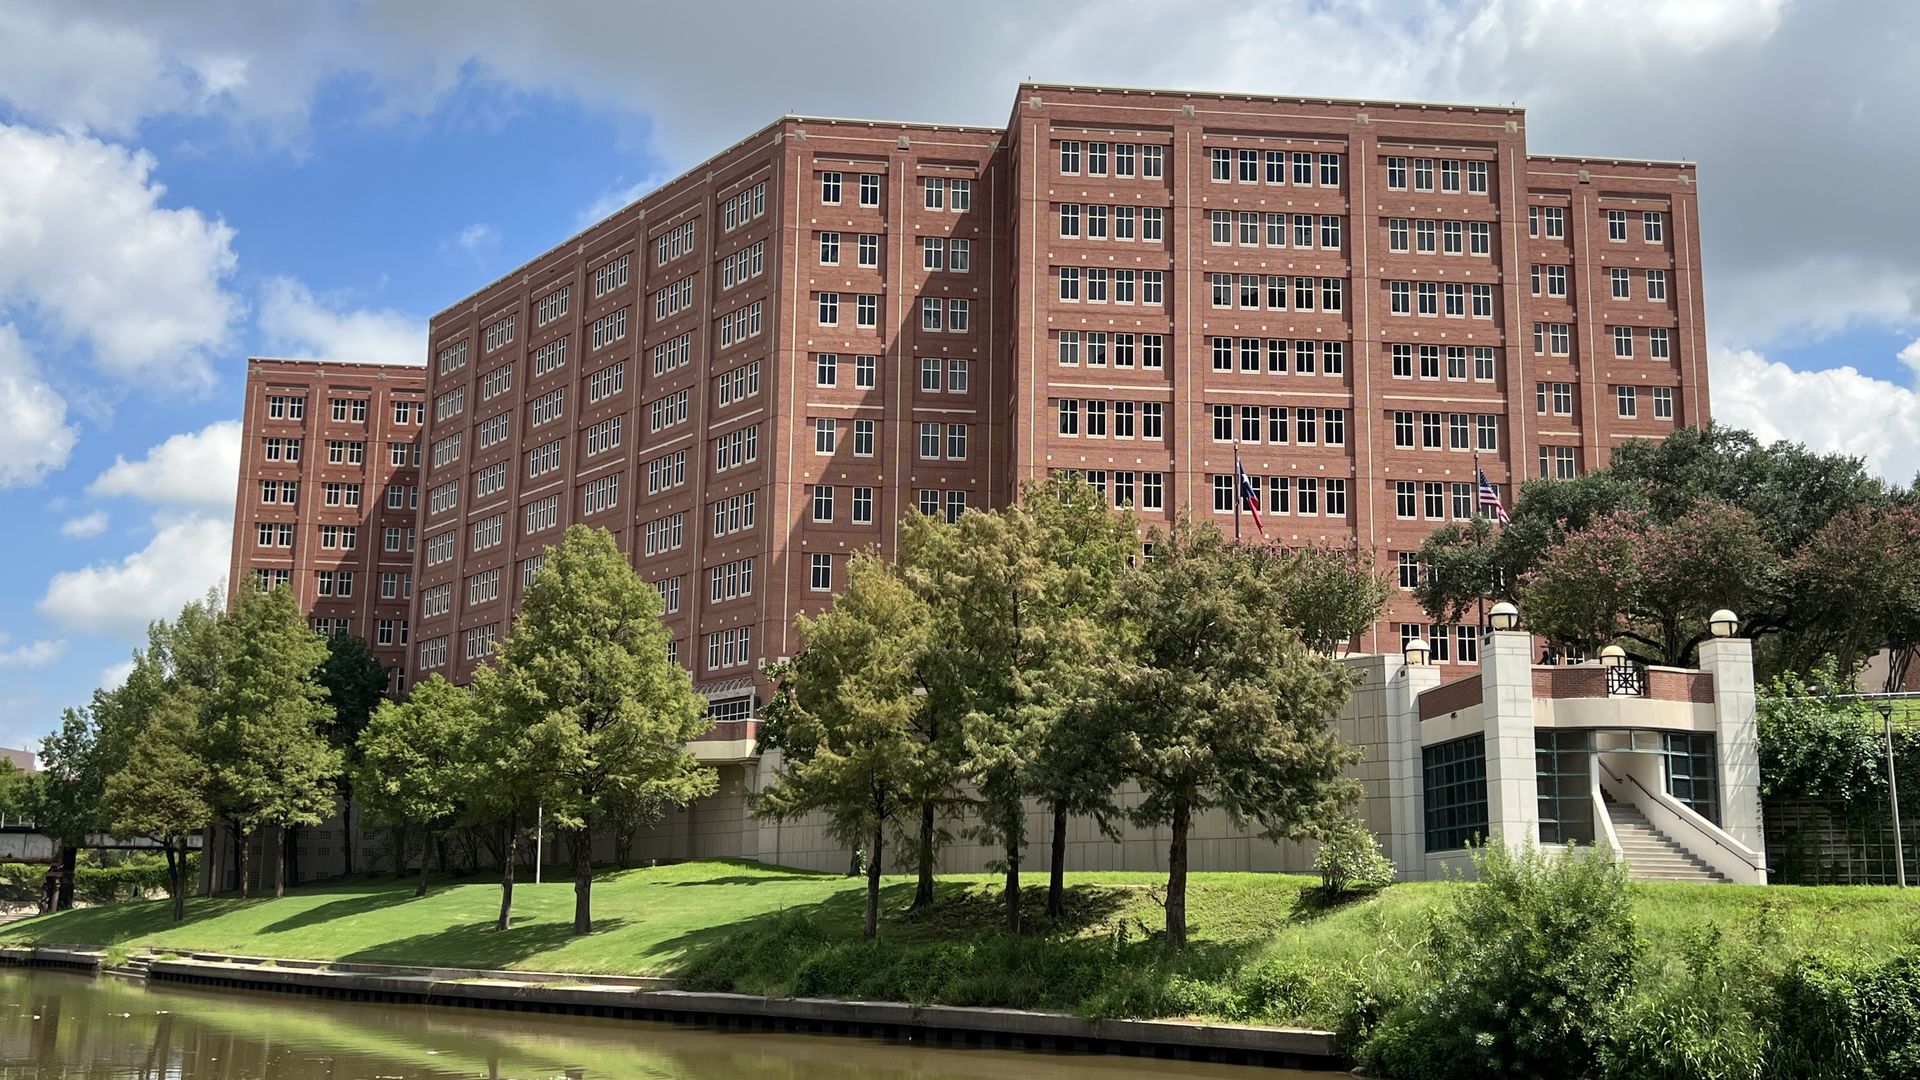 The Harris County Jail, a tall red-brick building with dark windows, sits on the banks of the Buffalo Bayou